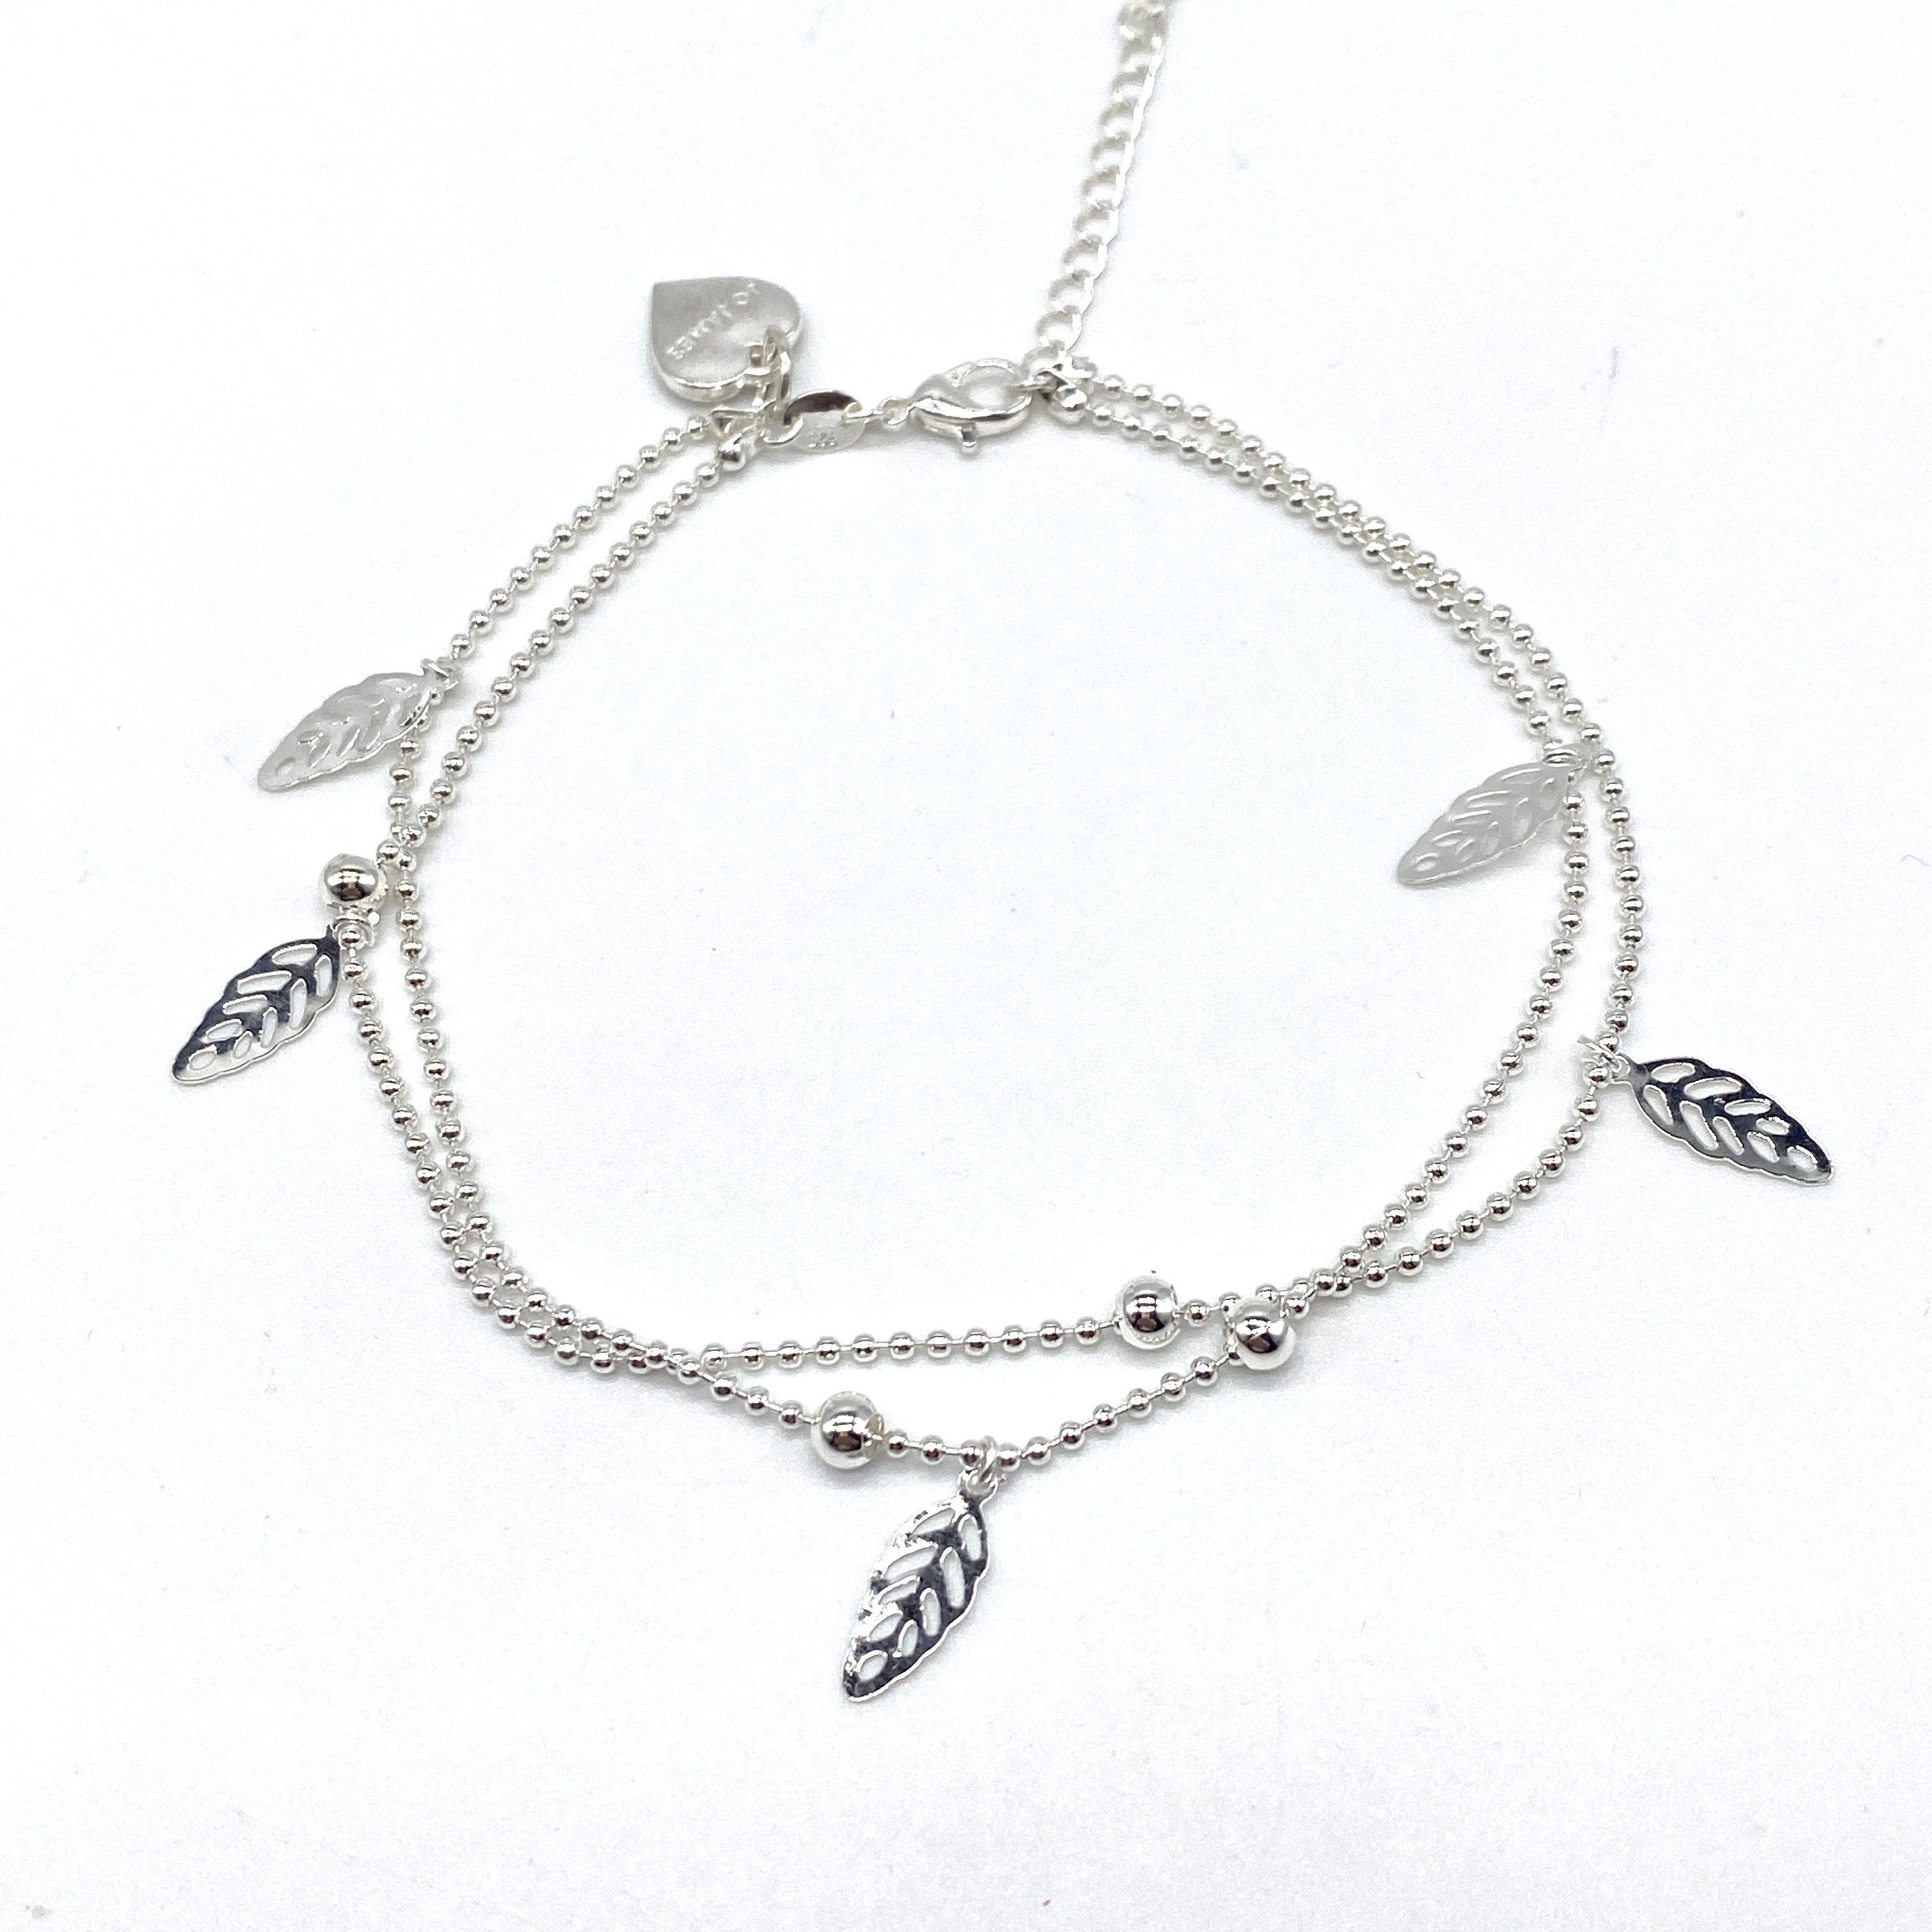 Lizzy James Gigi Anklet in Silver and Single Leather Strand Charm Ankle Bracelet 11 Inches